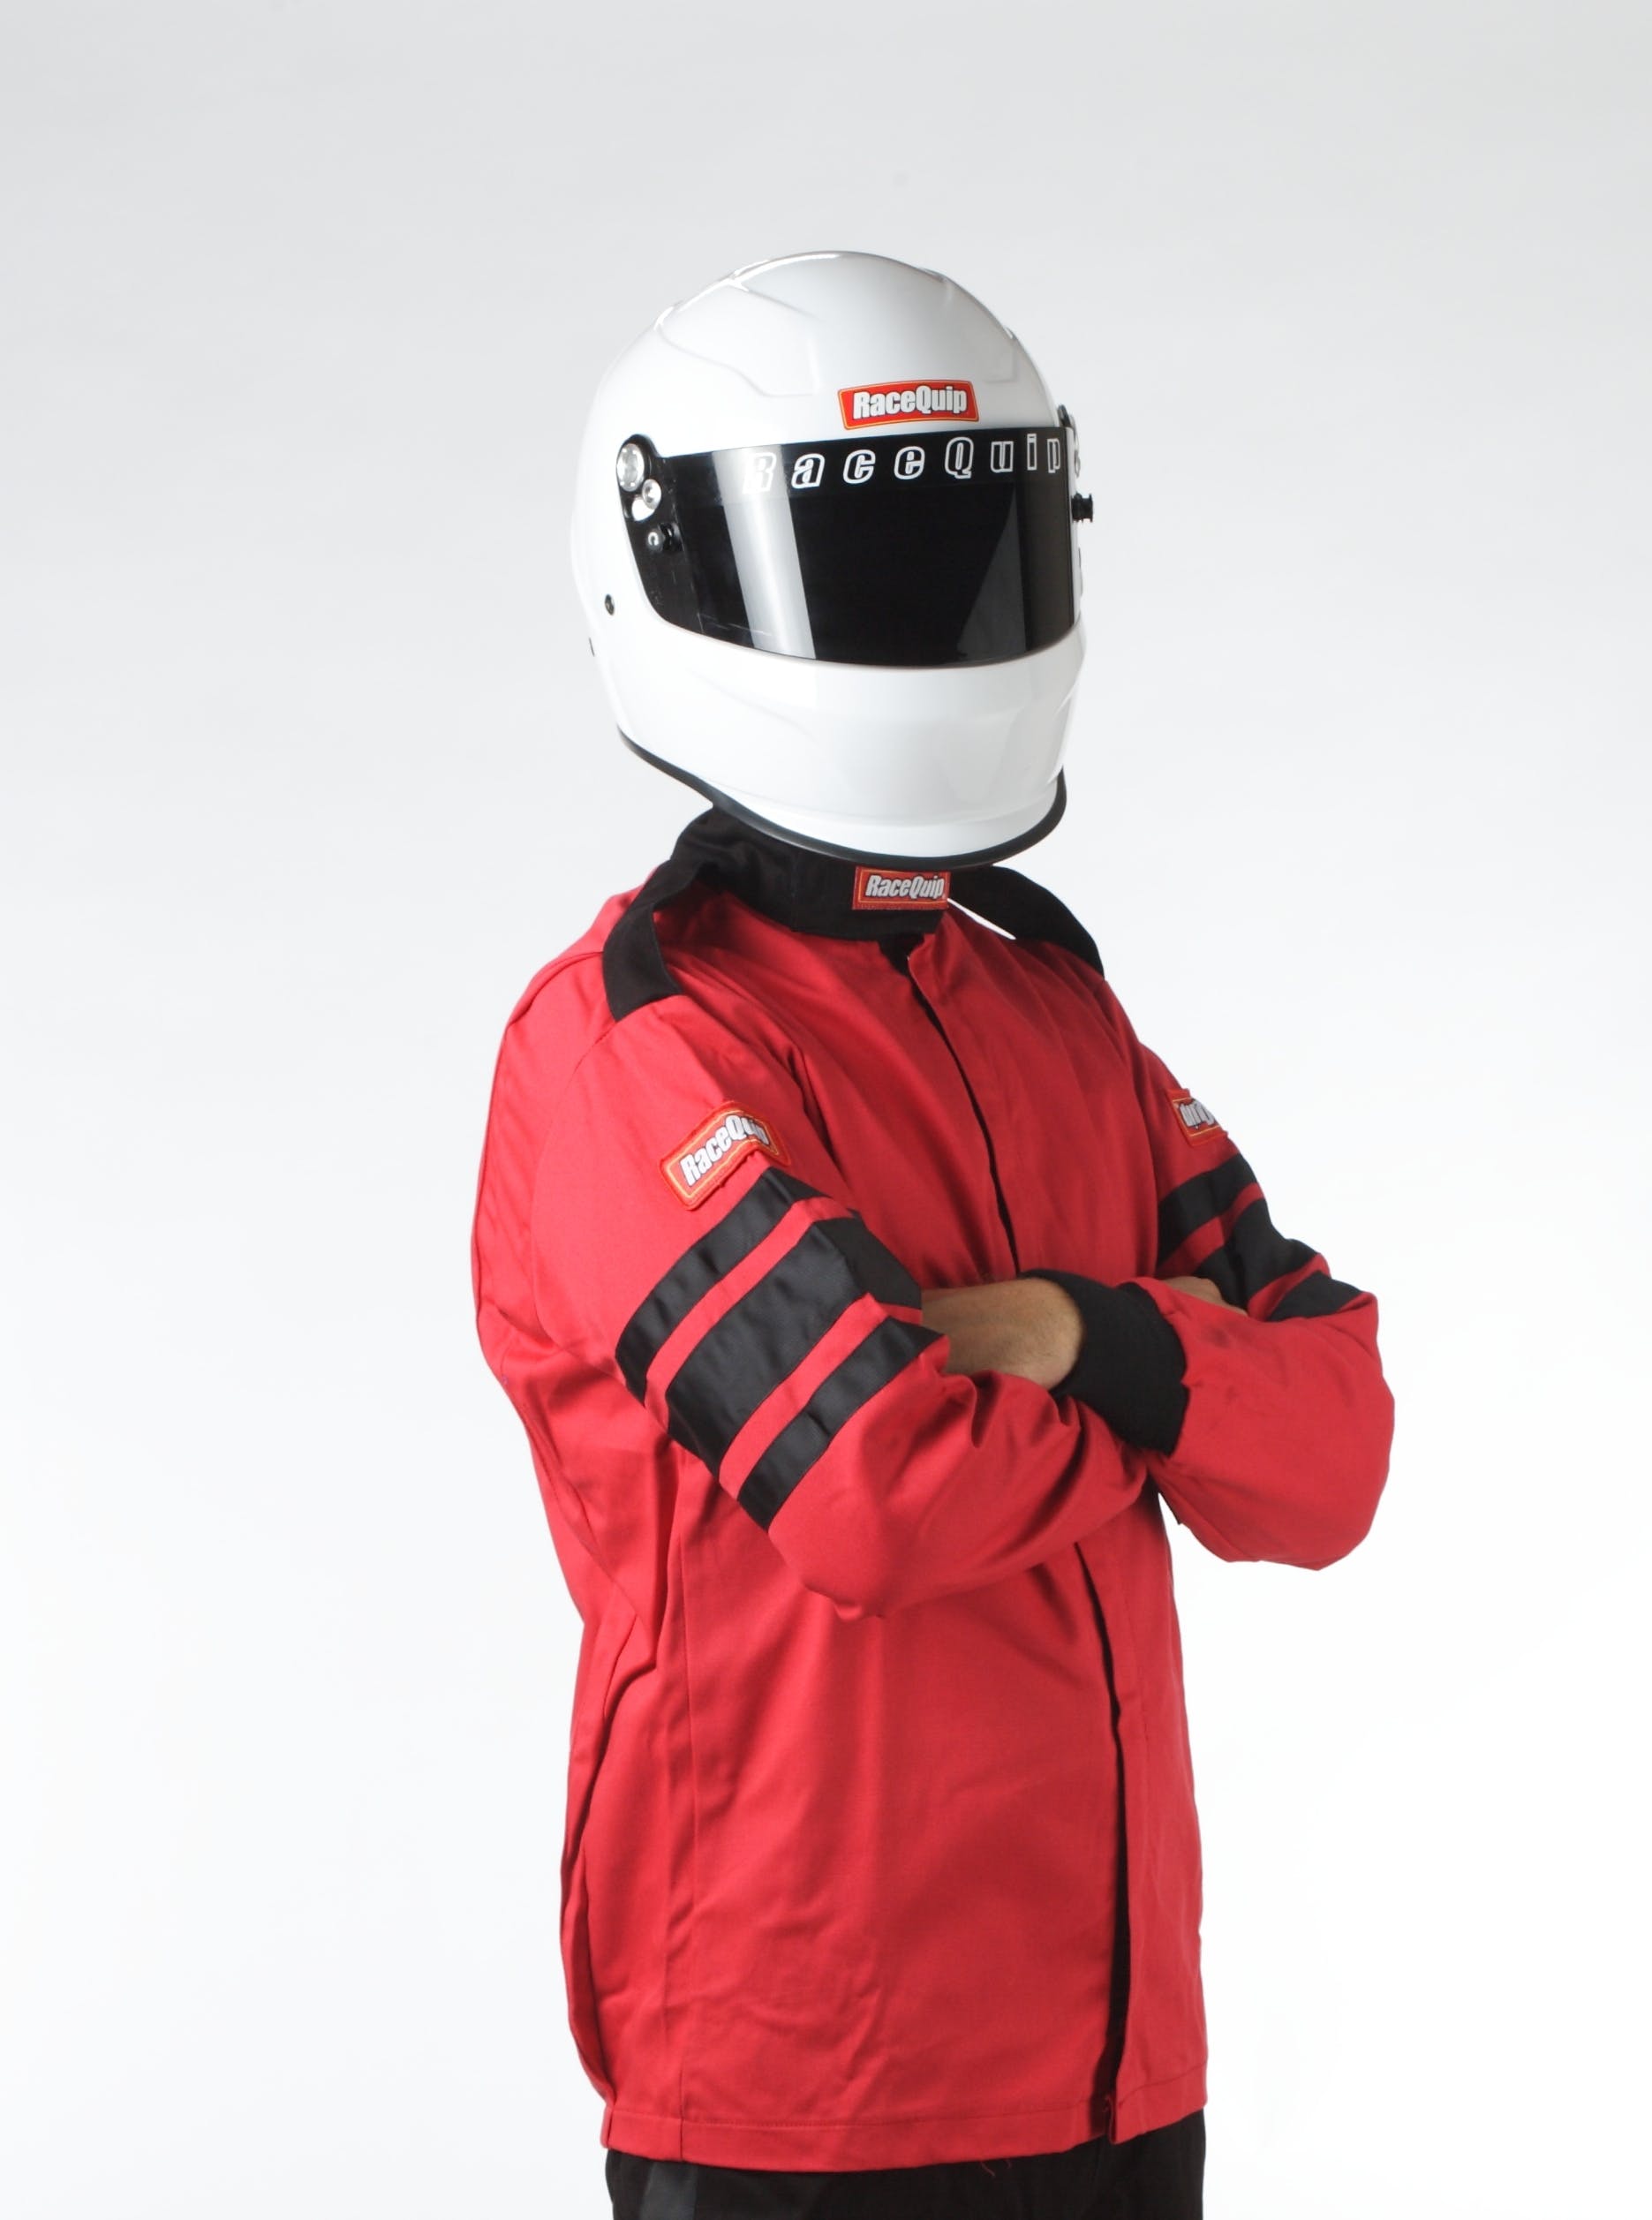 RaceQuip 111017 SFI-1 Pyrovatex Single-Layer Racing Fire Jacket (Red, XX-Large)